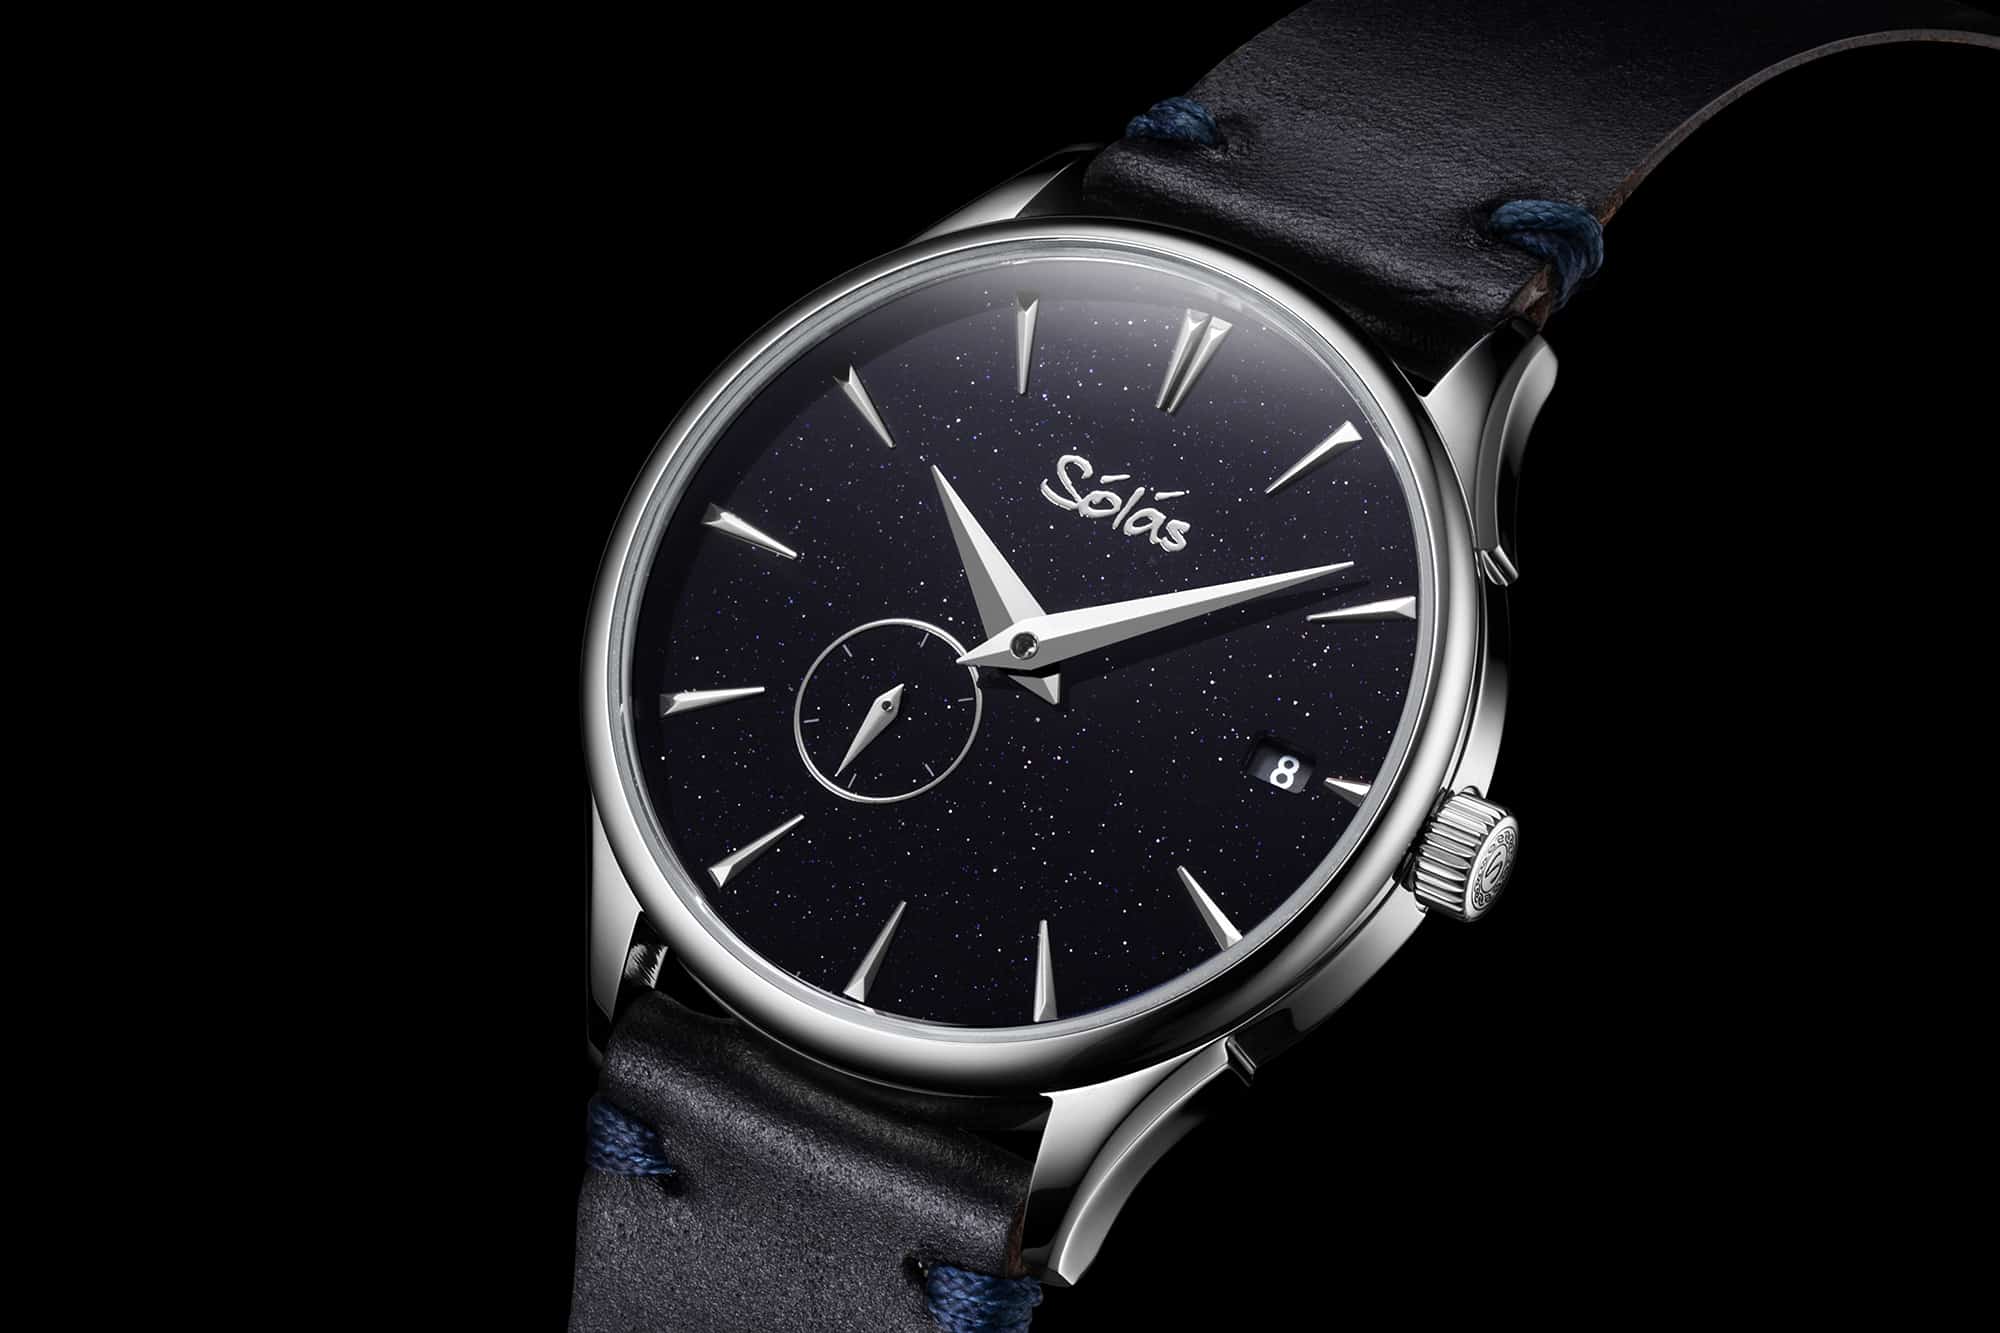 Introducing the Sólás Starlight, an Affordable Watch with a Micro-Rotor Movement and Aventurine Dial